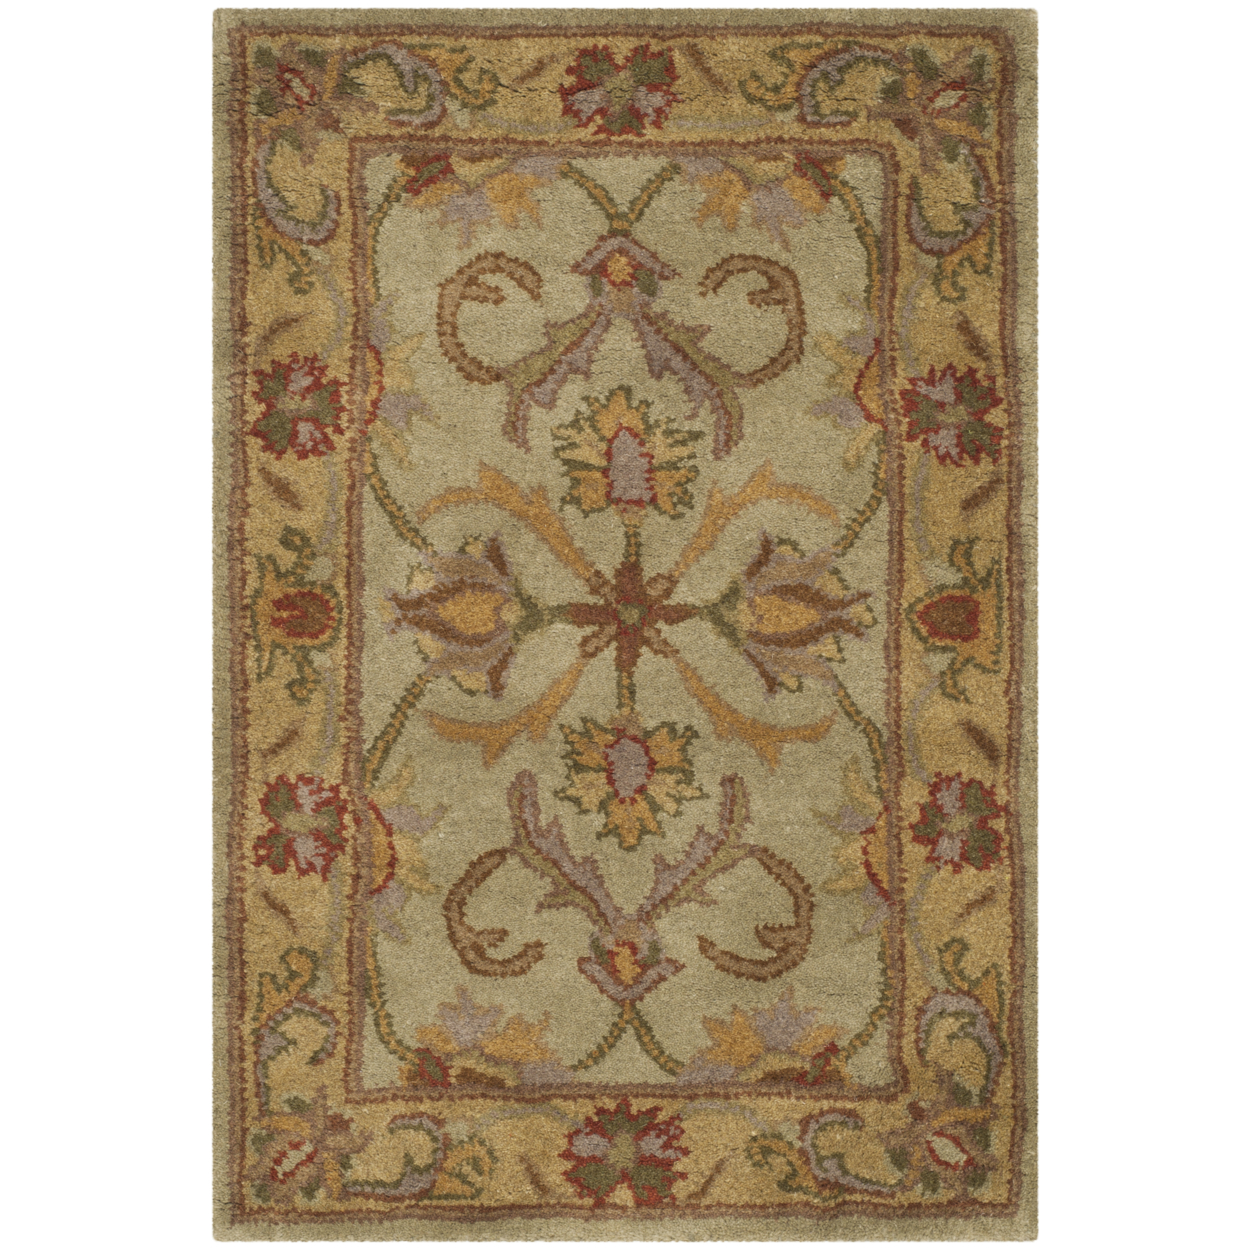 Safavieh HG811A Heritage Green / Gold - 8' Square